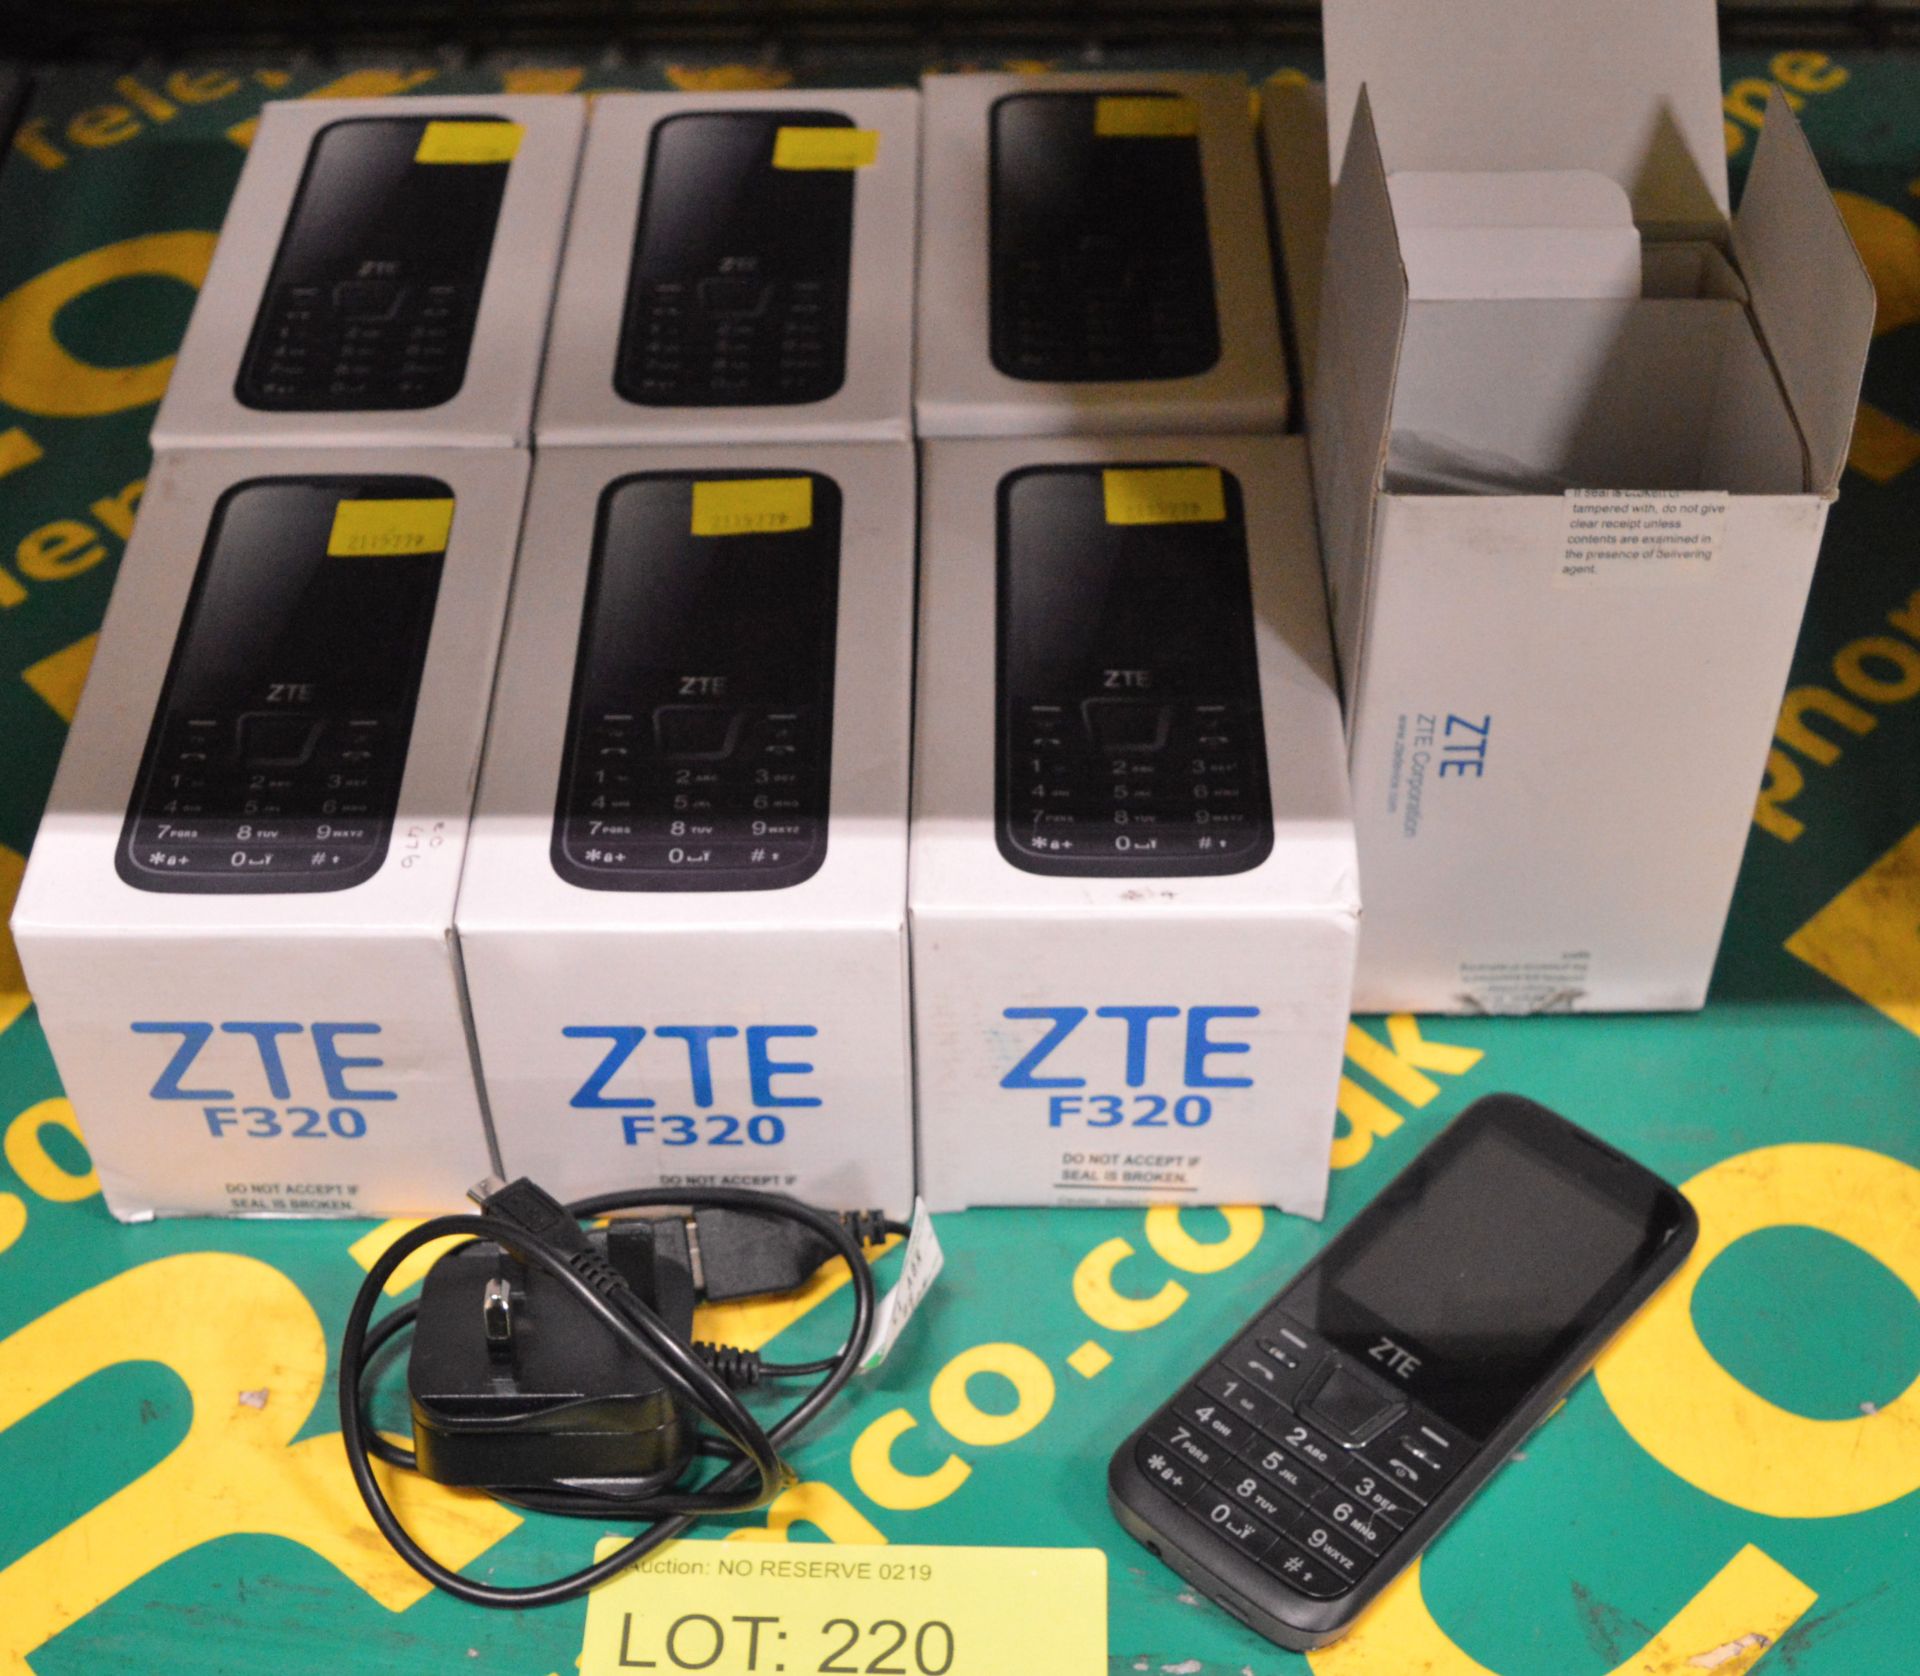 8x ZTE F320 Mobile Phone Boxed.